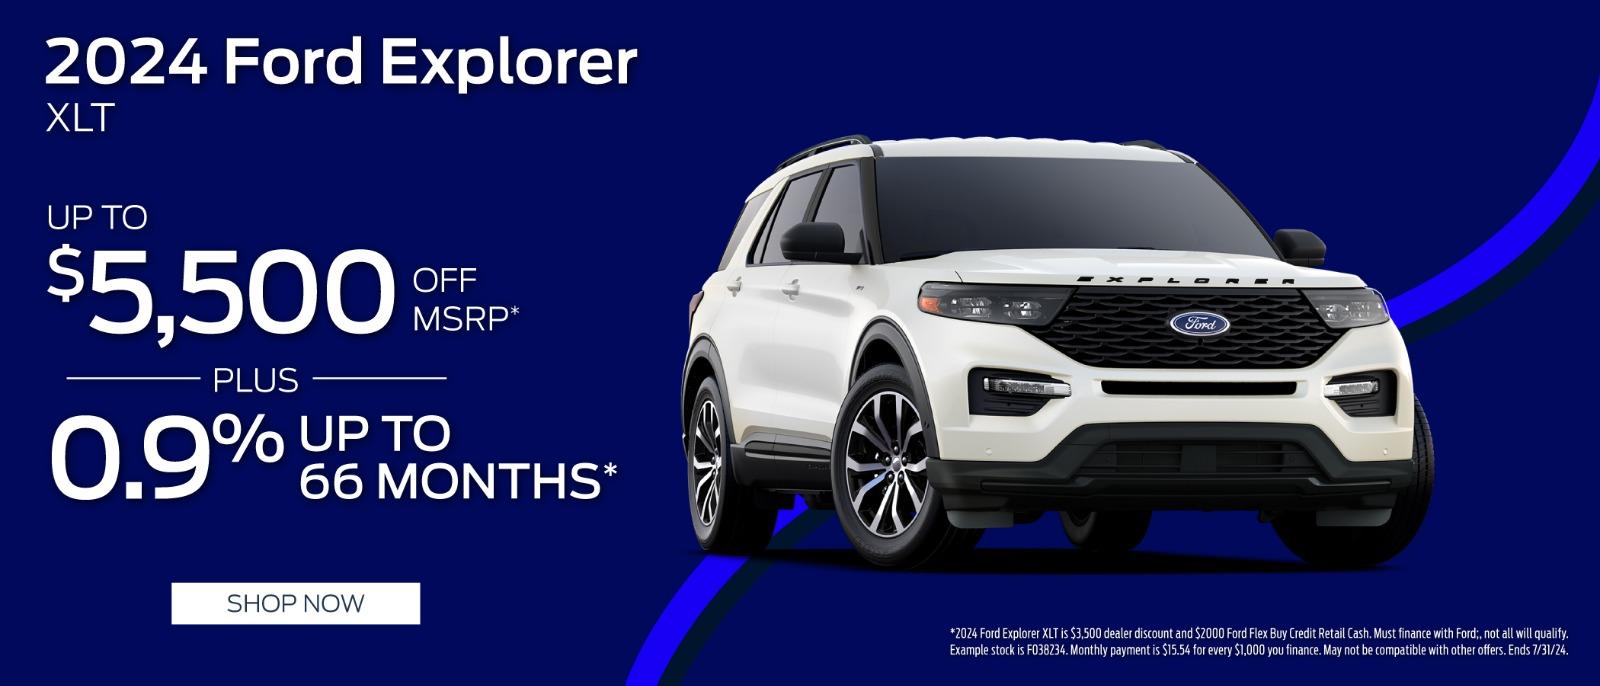 2024 Ford Explorer $5,500 Off MSRP plus up to 1.9% for 66 months